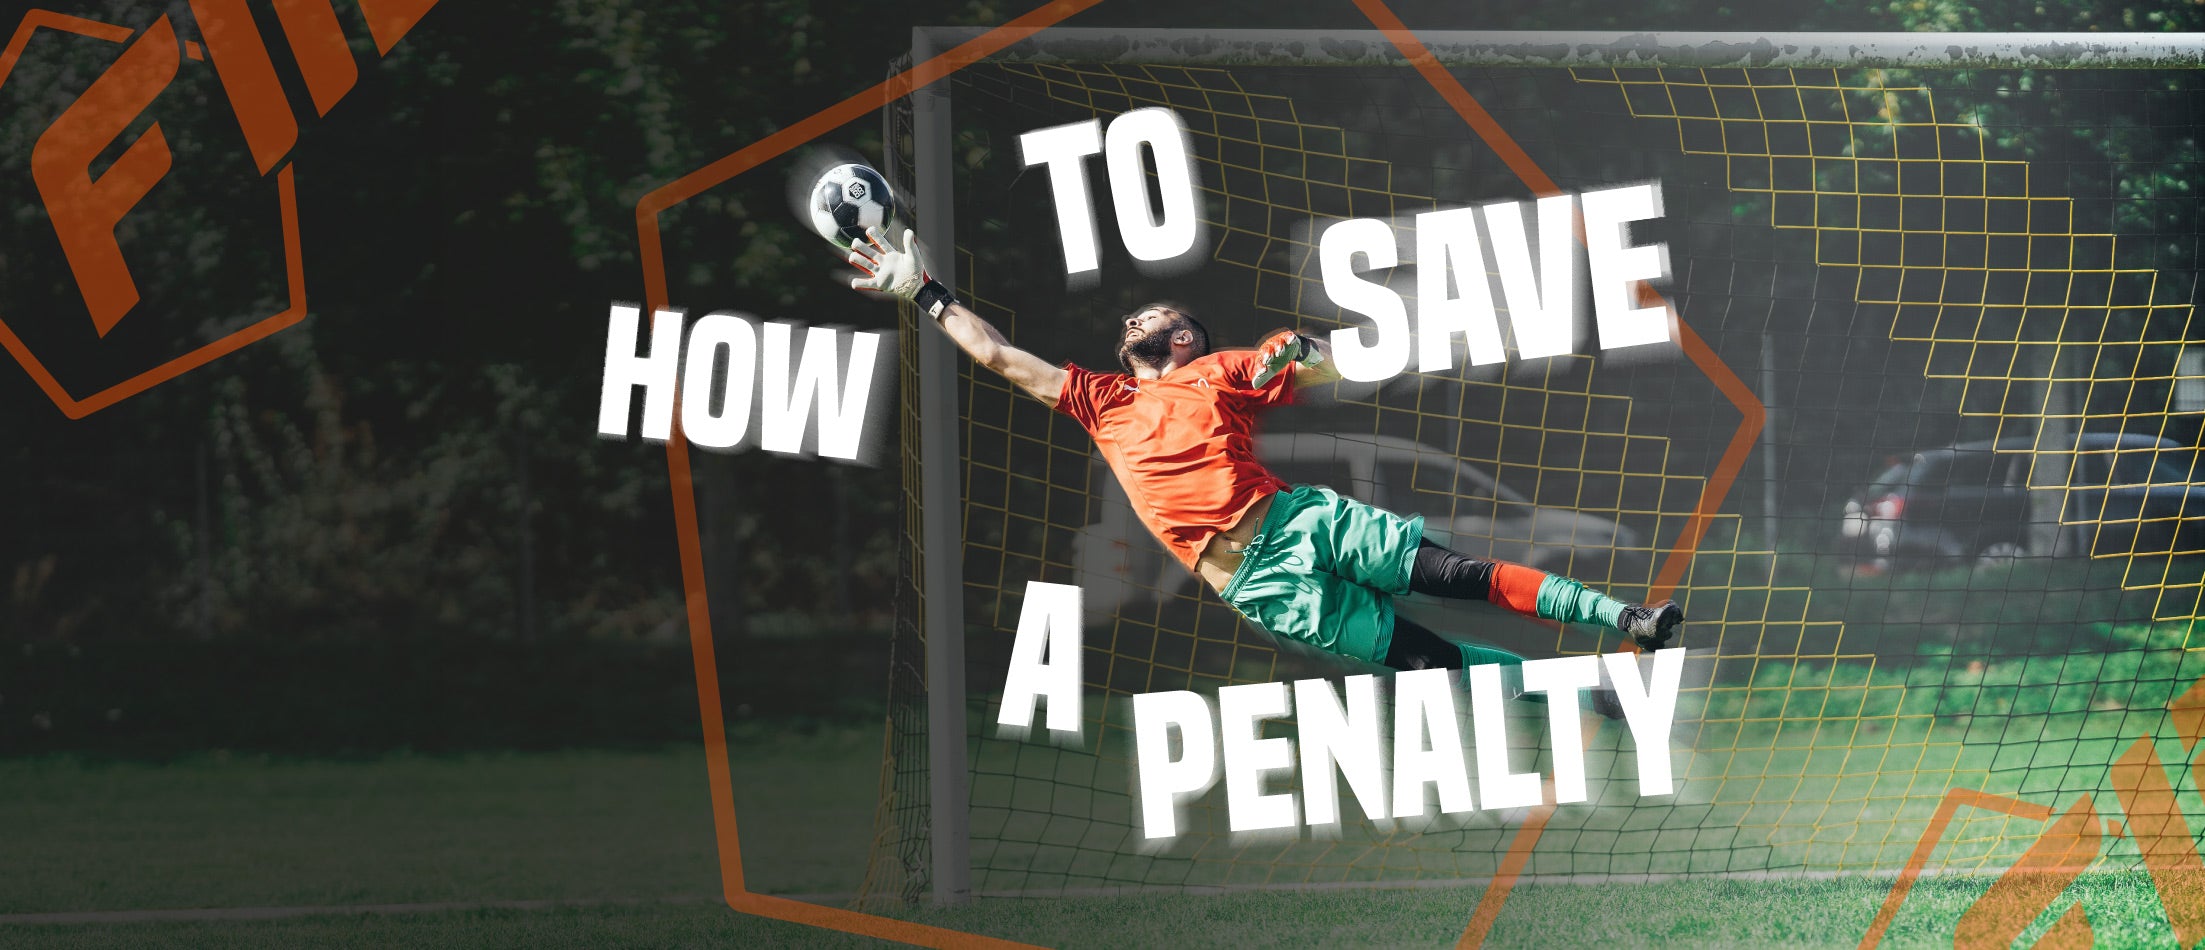 How to save a penalty